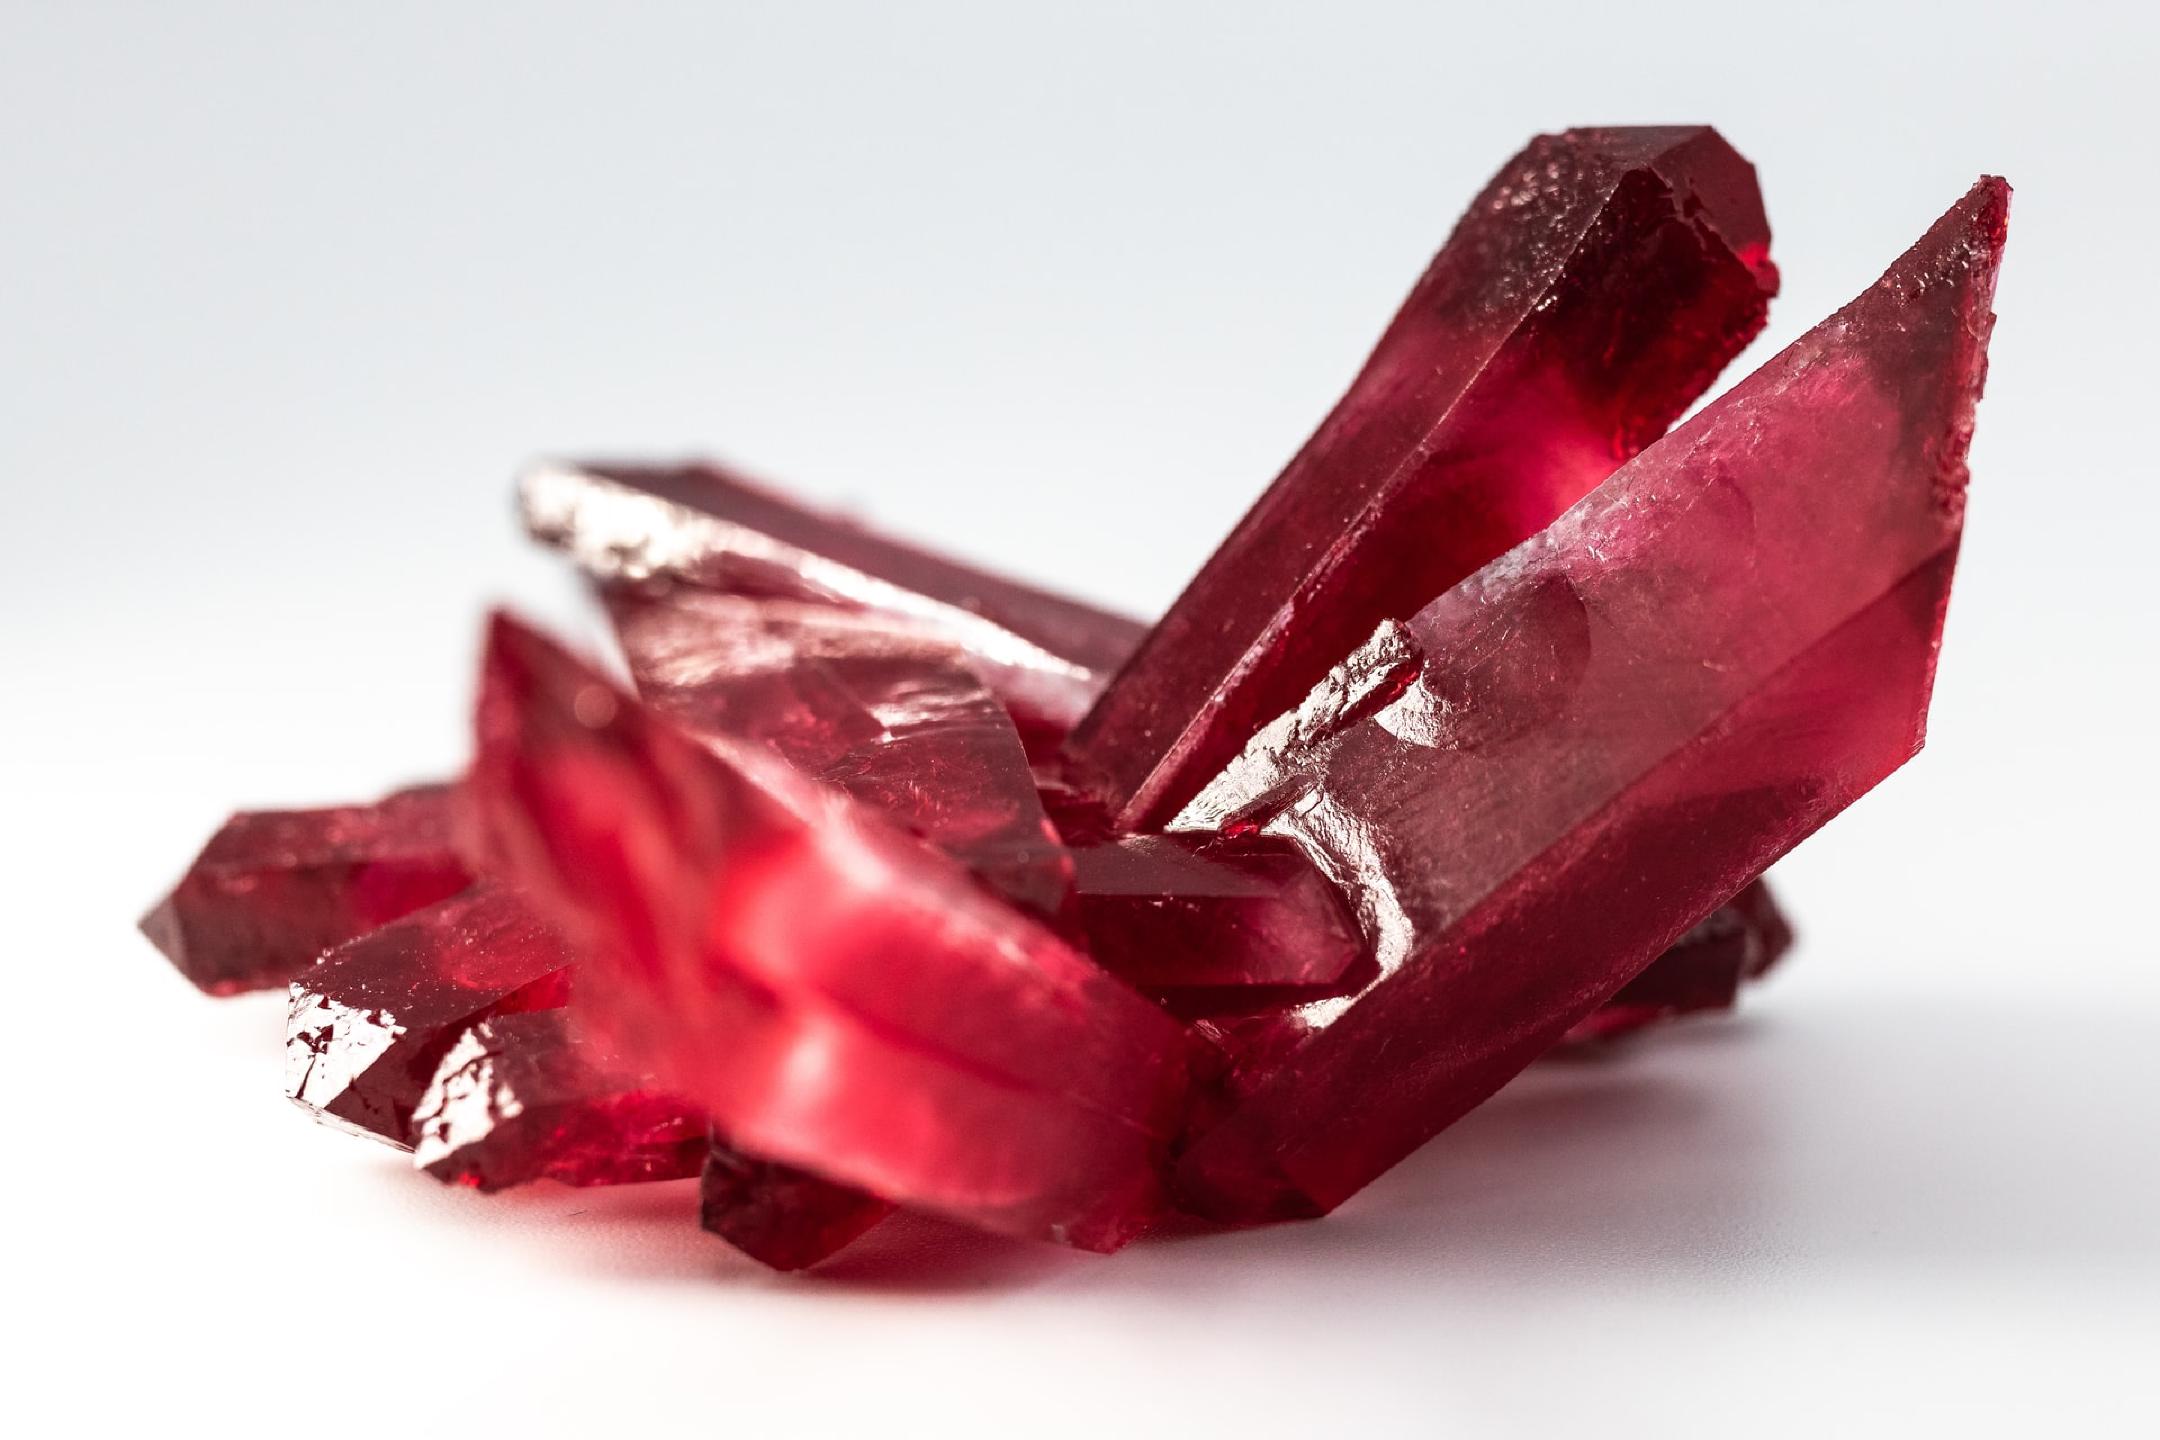 a dark red irregularly shaped piece of ruby mineral with many sharp corners